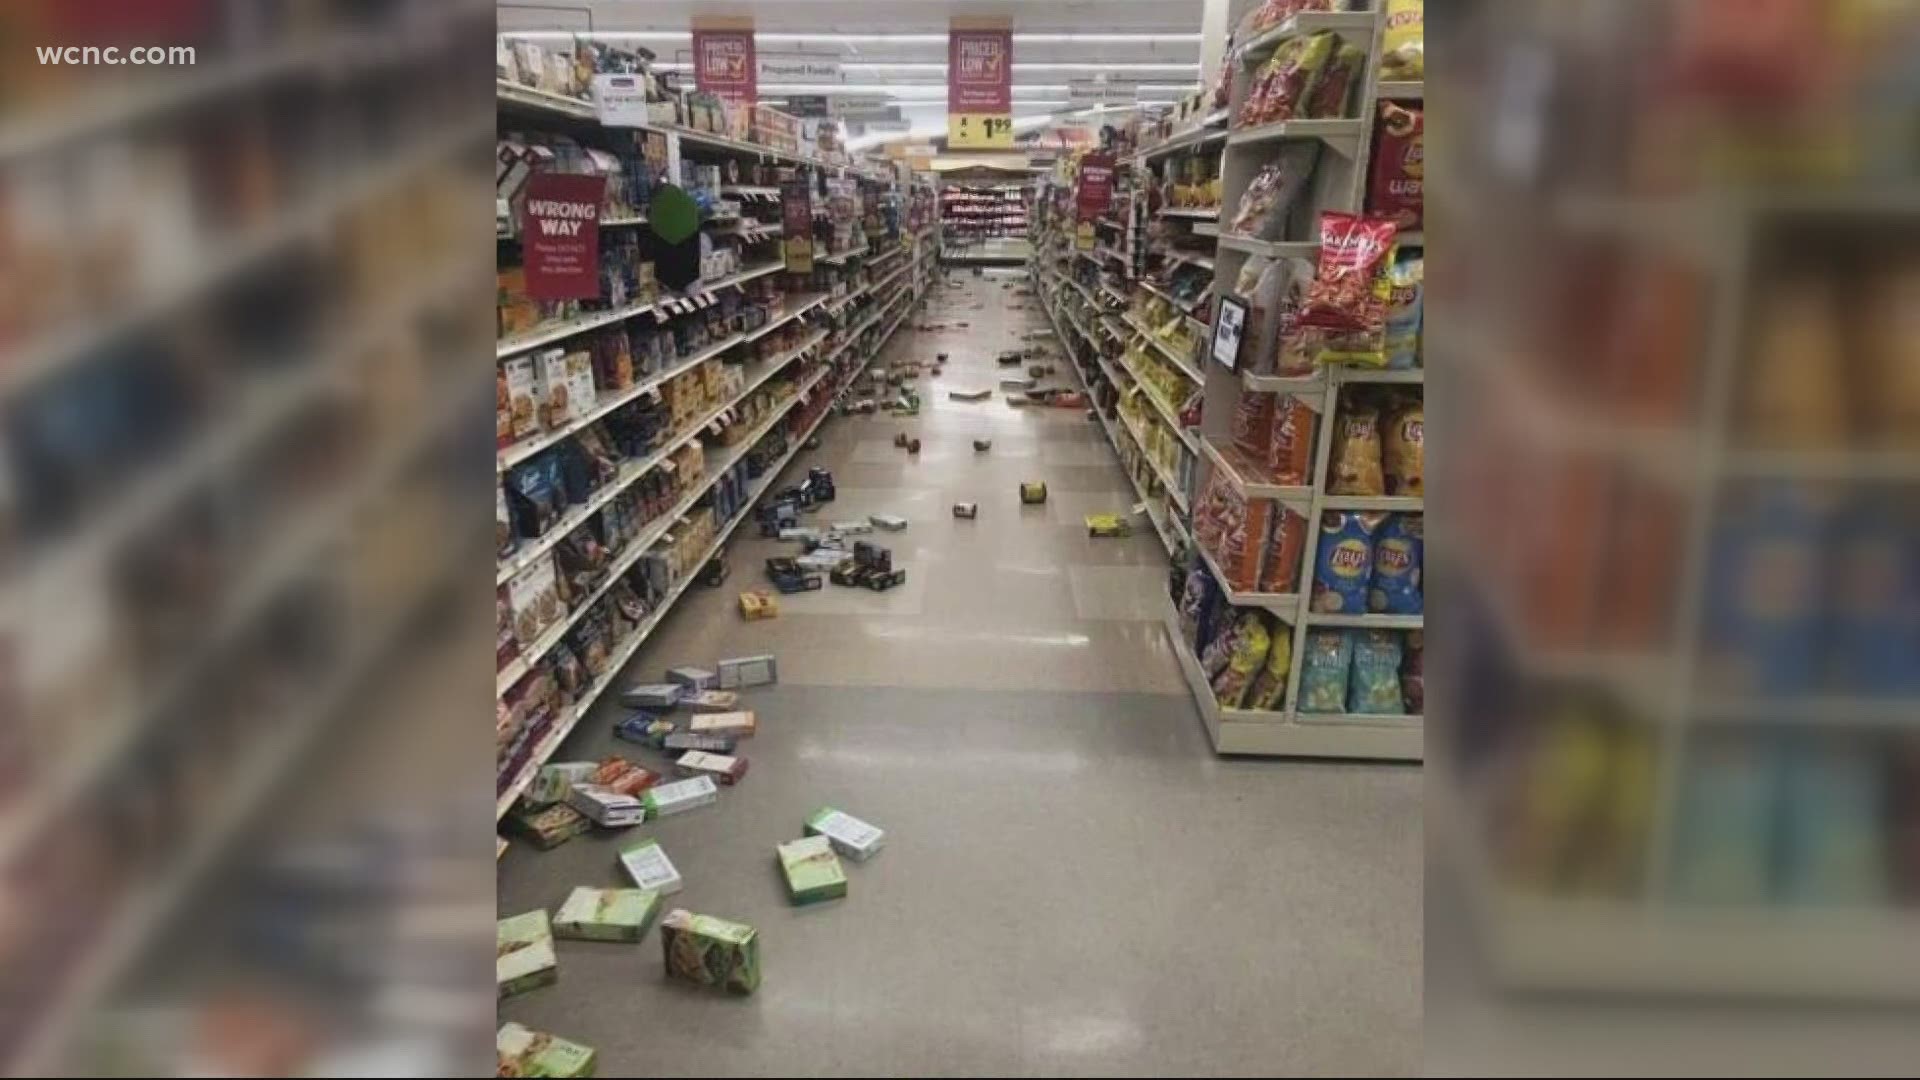 It was the largest earthquake to hit the state since 1916, when a magnitude 5.5 quake occurred near Skyland, the weather service said.